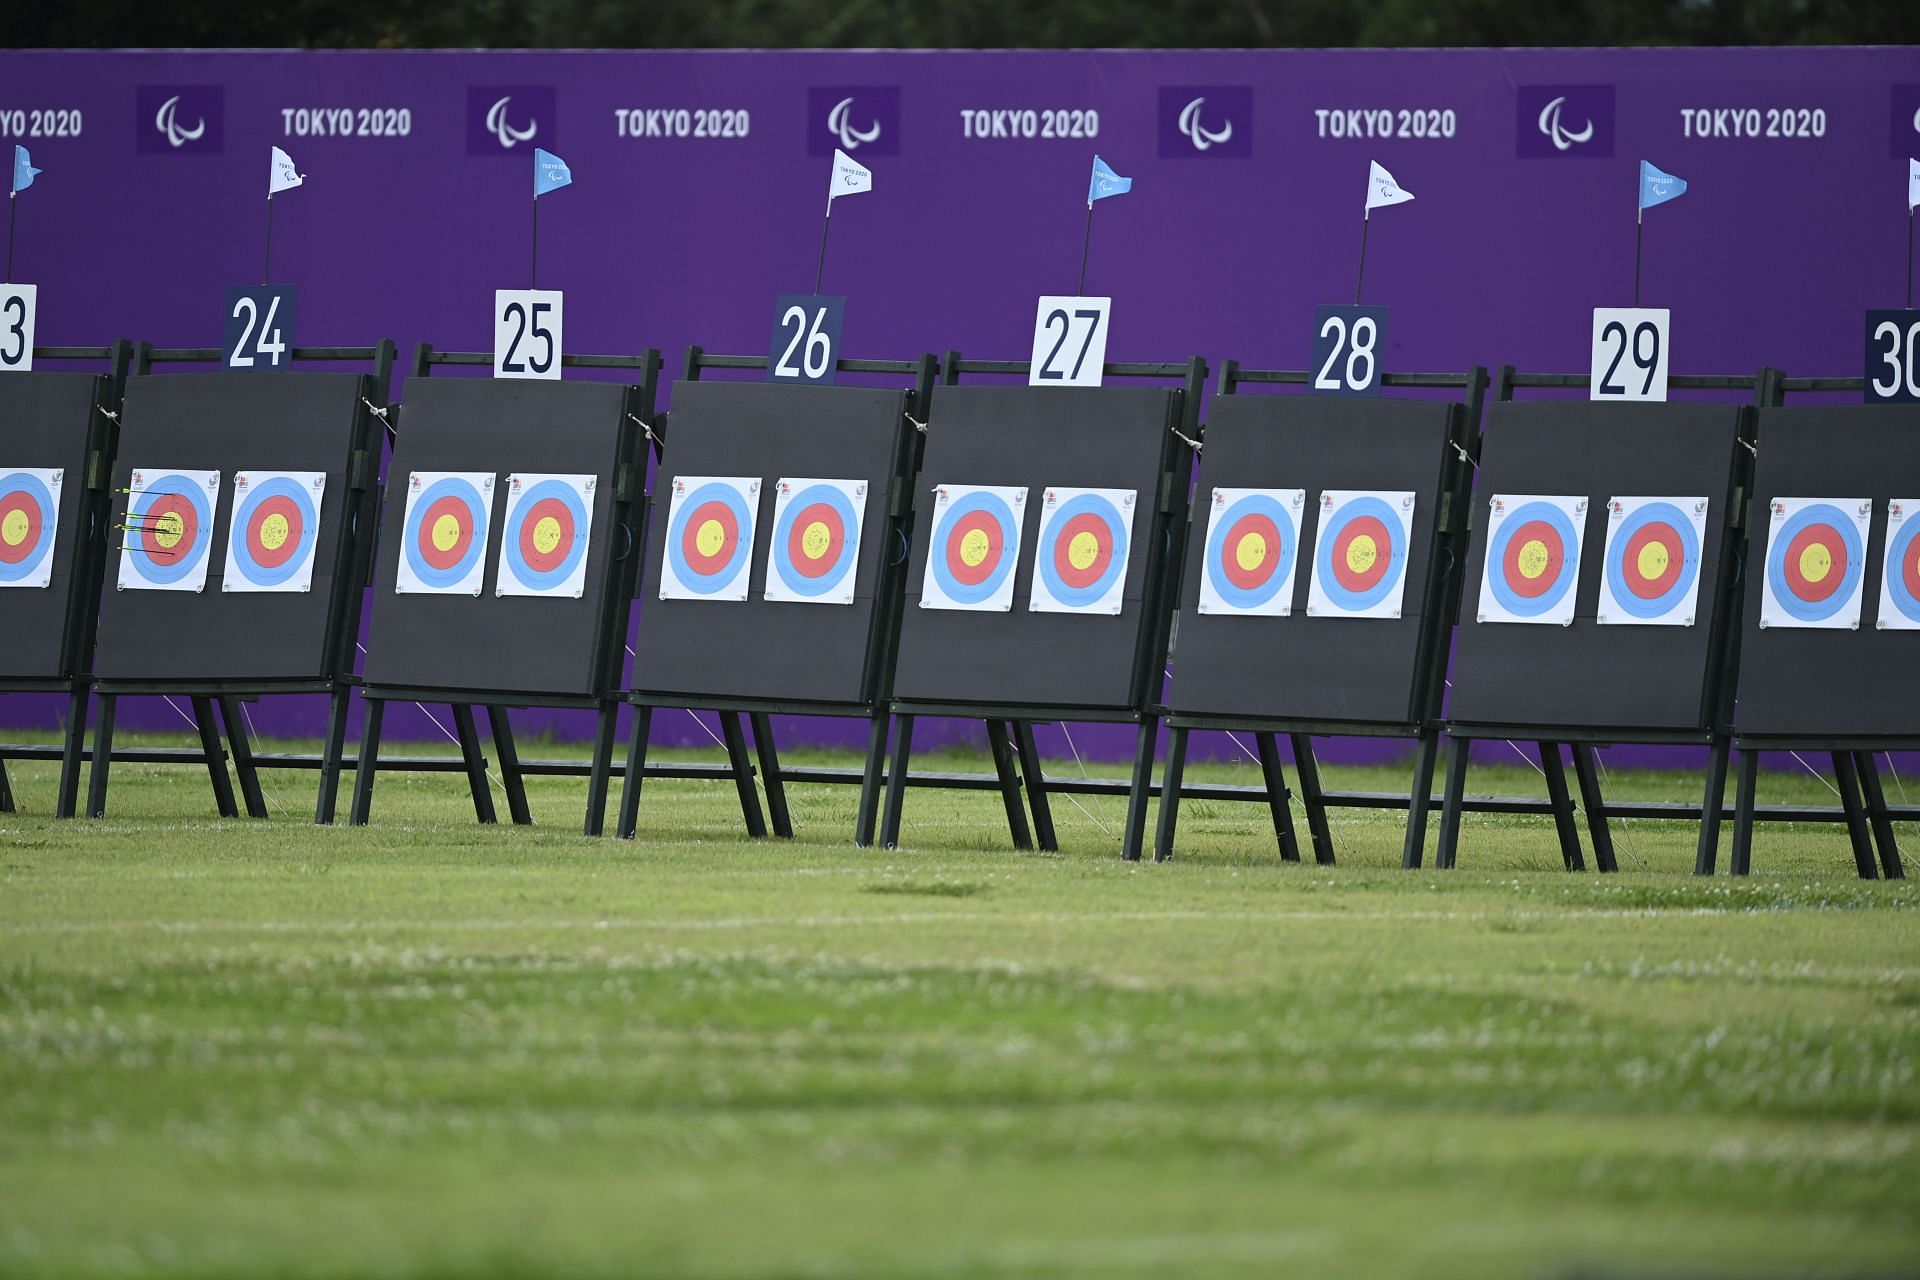 The Archery World Cup Final will be held in October. (PC: Getty Images)